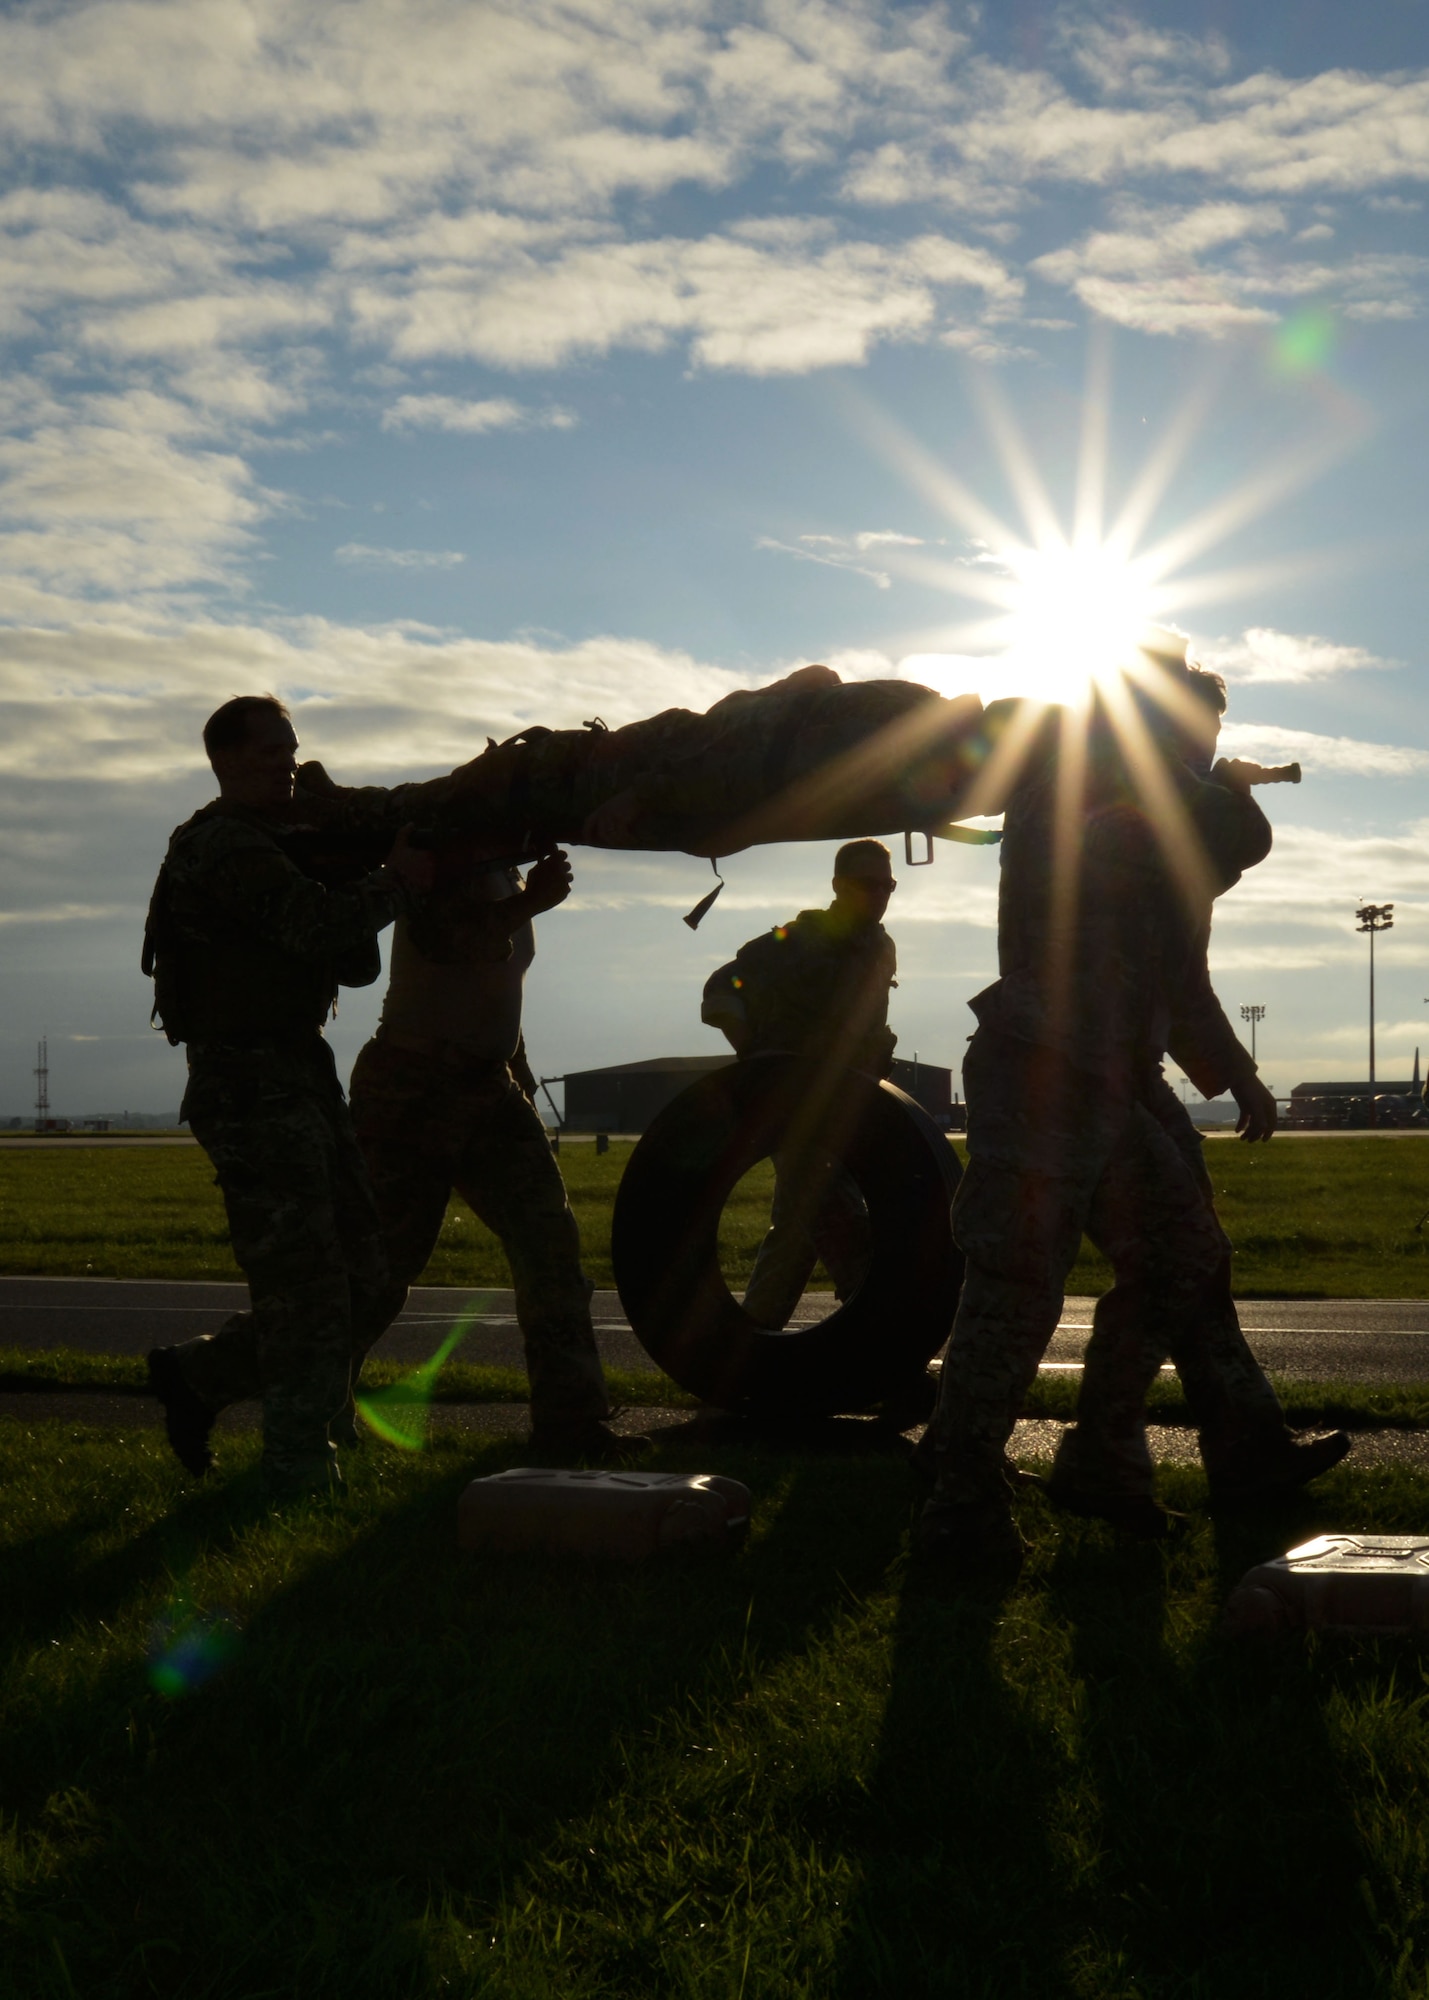 A team carries an “injured” teammate, jerry cans of water and tires to the next station Sept. 26, 2014, during the Monster Mash on RAF Mildenhall, England. The Monster Mash consisted of various events such as carrying an inflatable boat, marching with a 40-pound rucksack and a blind weapons assembly. A Monster Mash is a long-standing special tactics tradition which combines events designed to test strength, stamina and problem solving skills. (U.S. Air Force photo/Tech. Sgt. Stacia Zachary/Released)